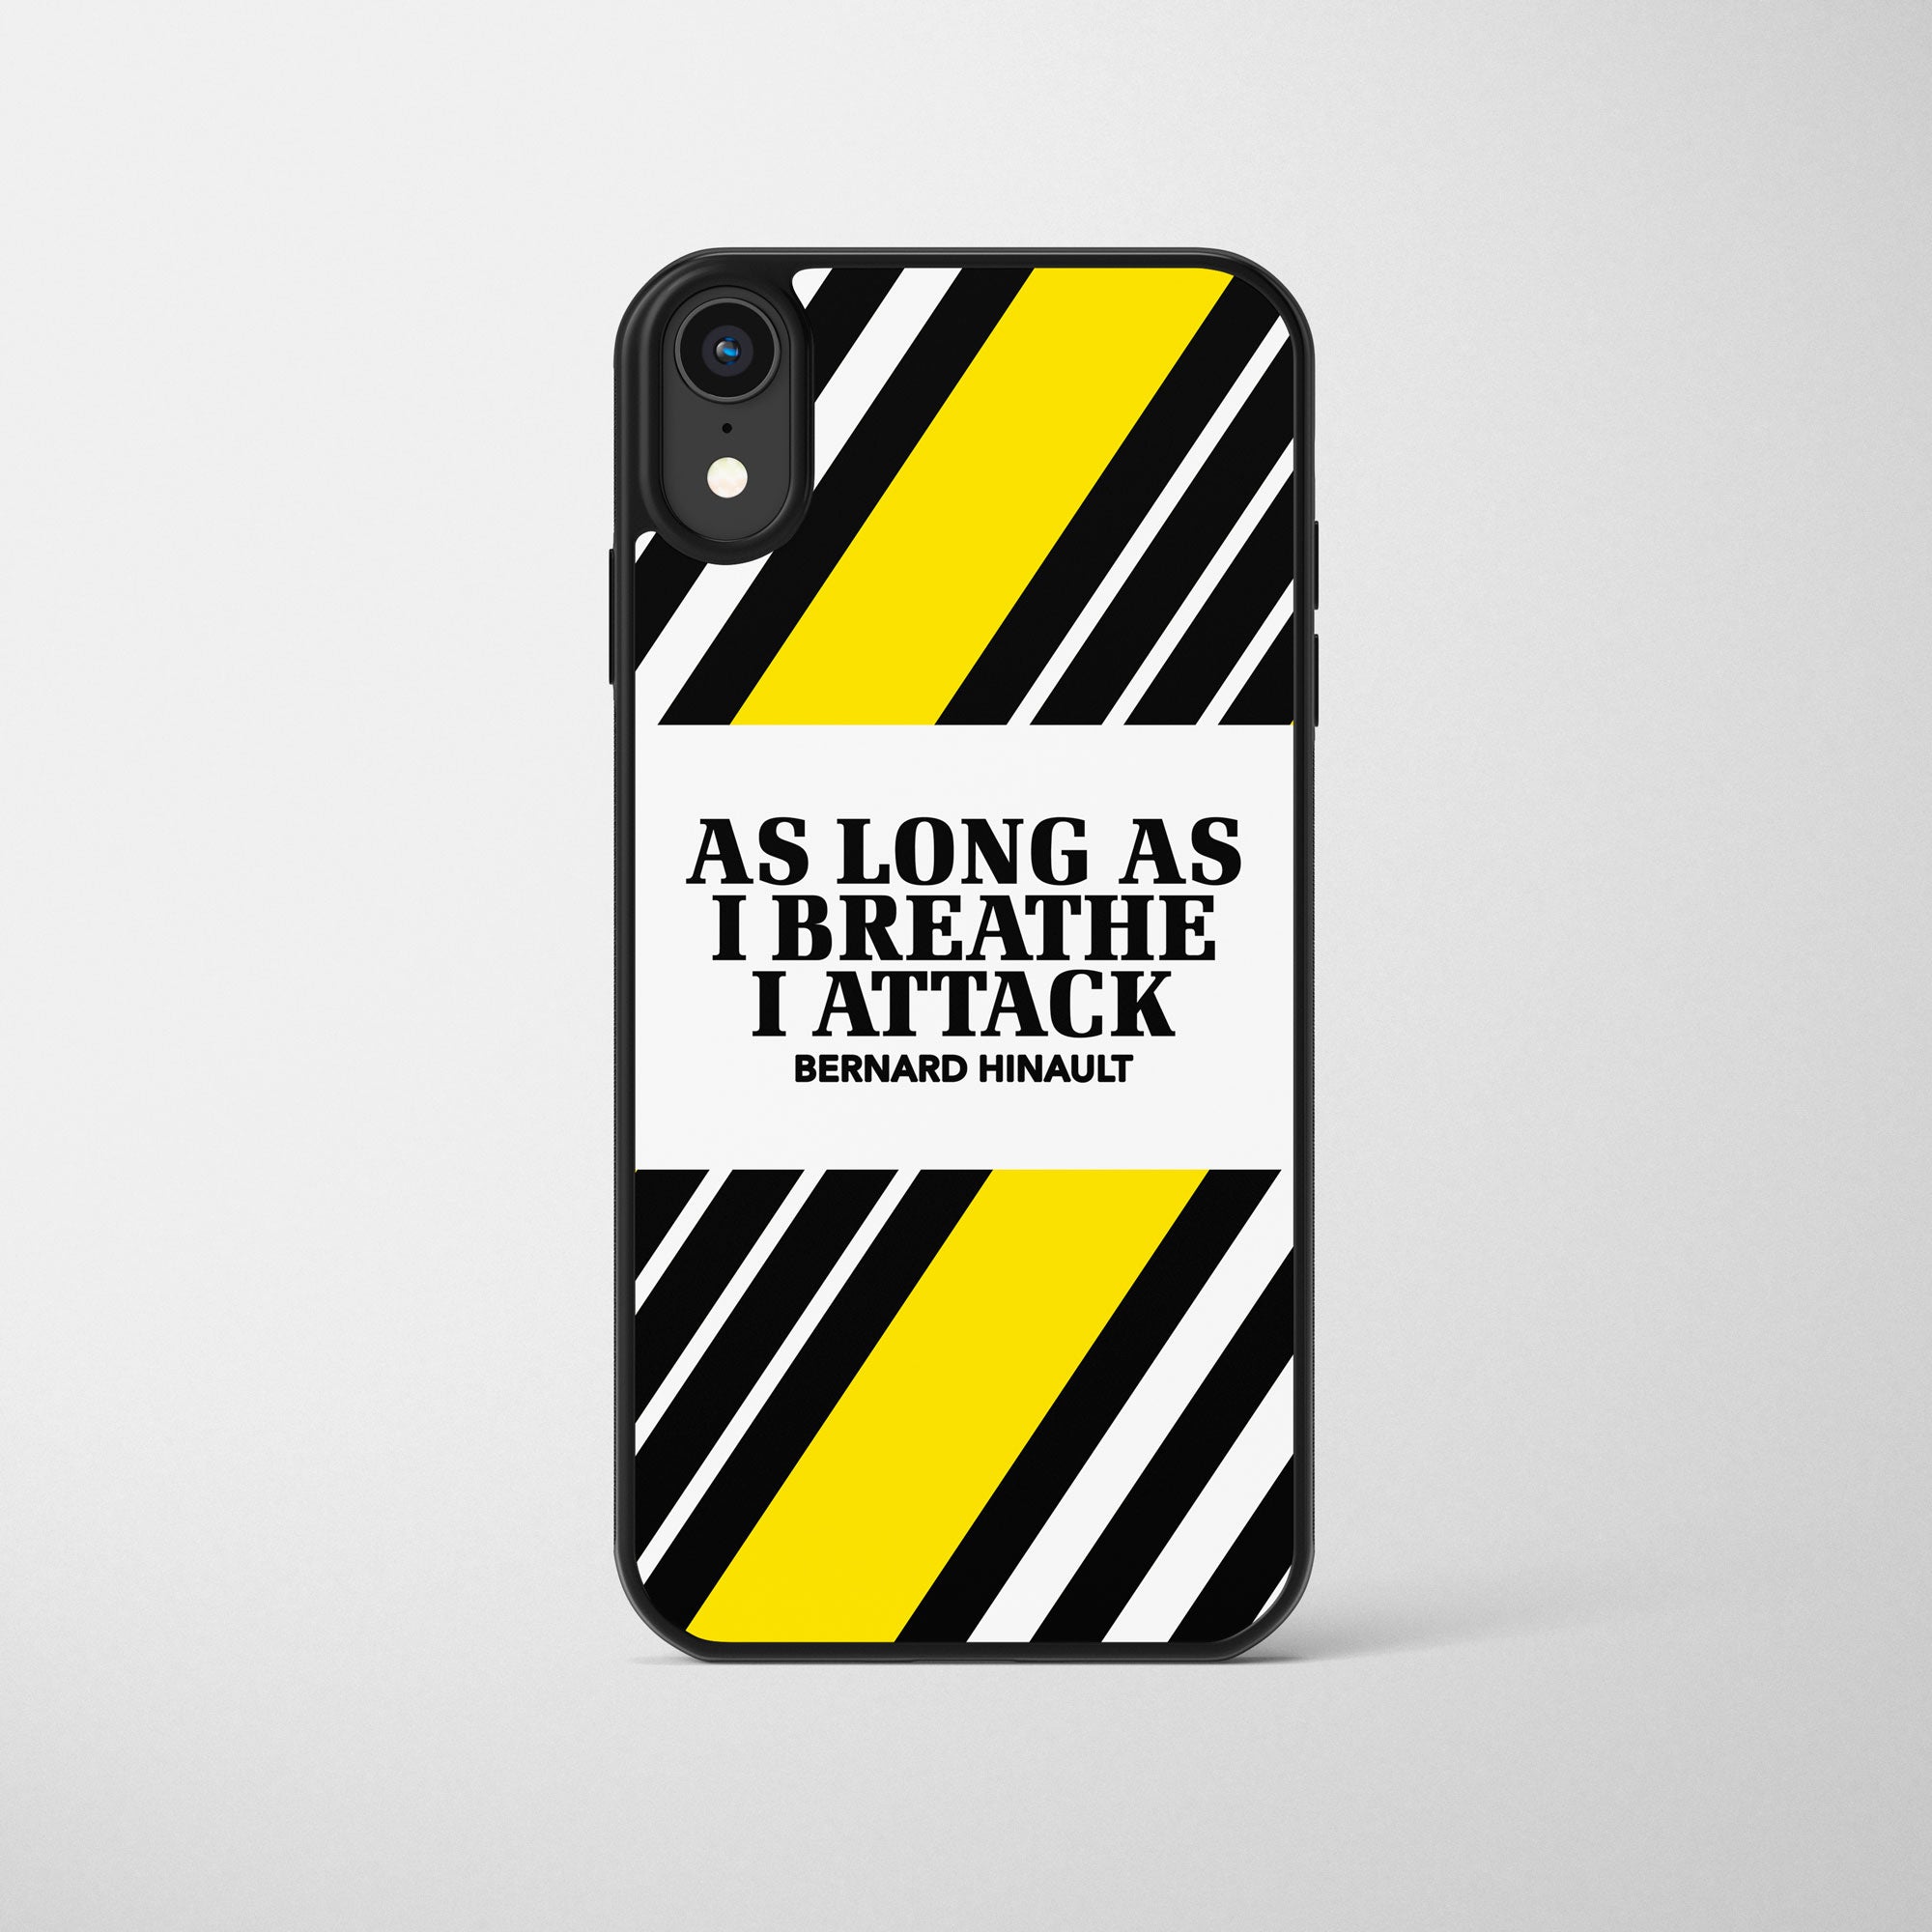 As Long As I Breathe I Attack Race Edition Phone Case